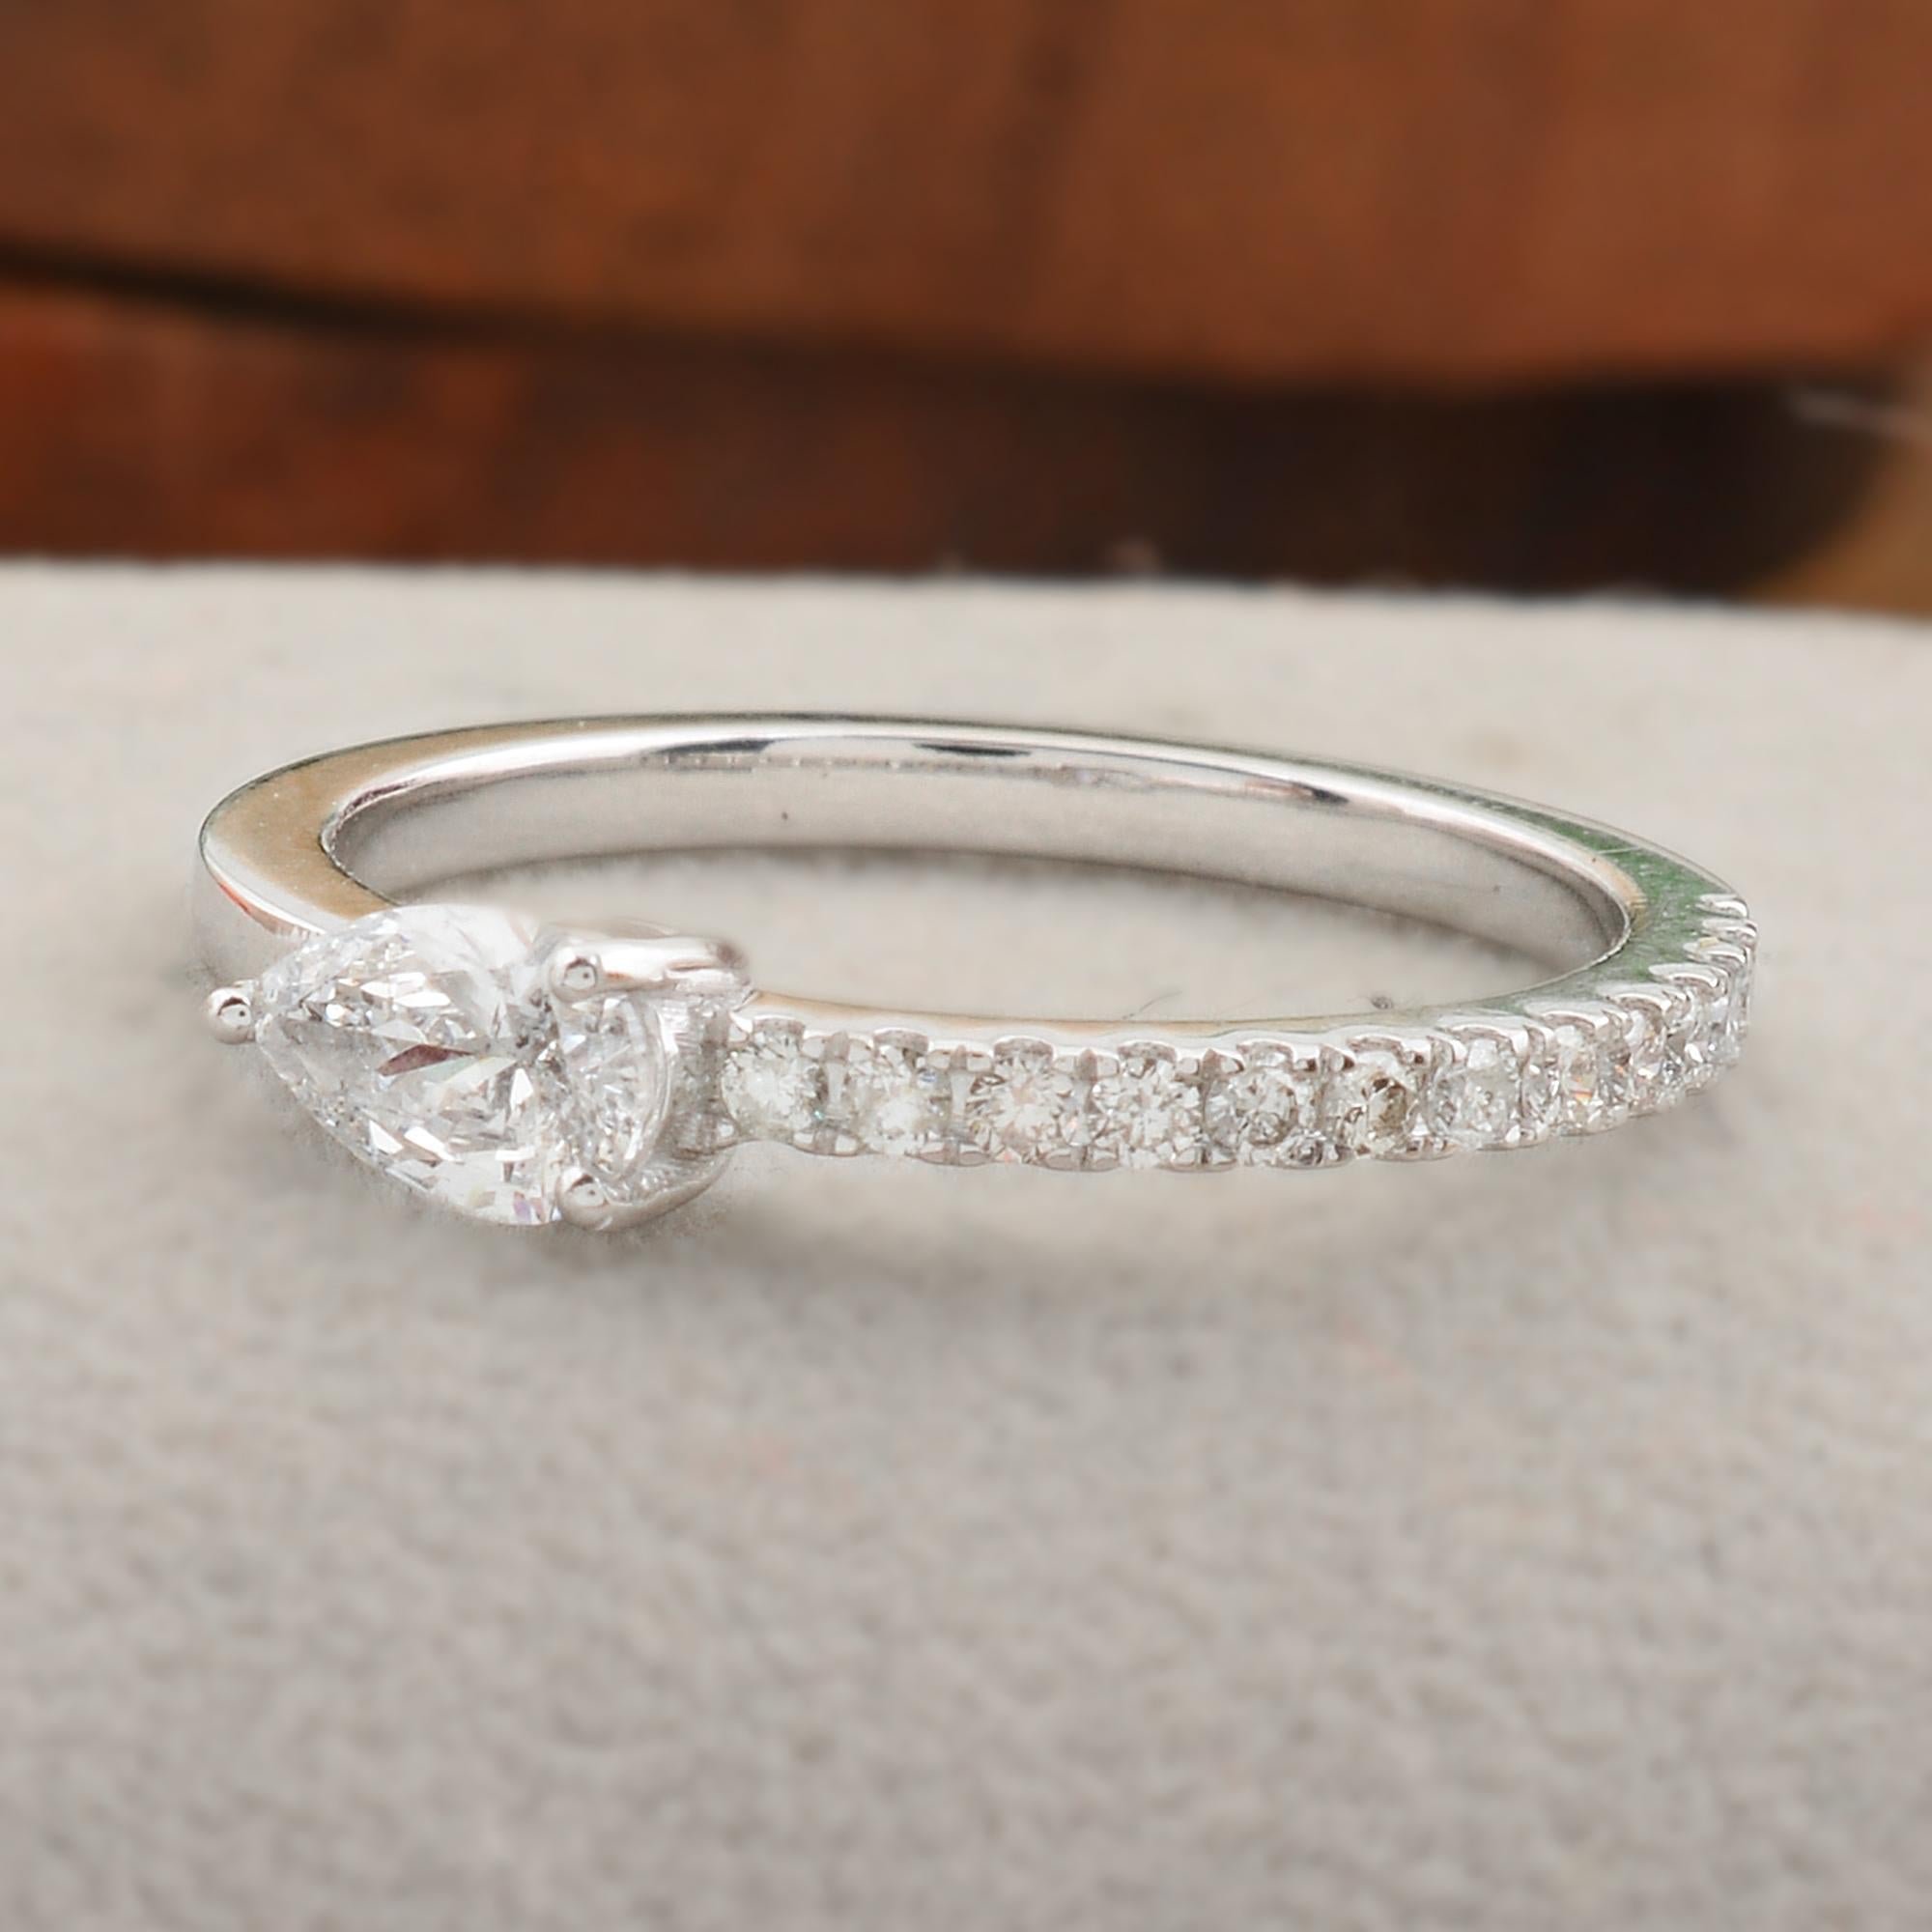 For Sale:  Natural 0.49 Carat SI Clarity HI Color Pear Diamond Band Ring 14k White Gold 4